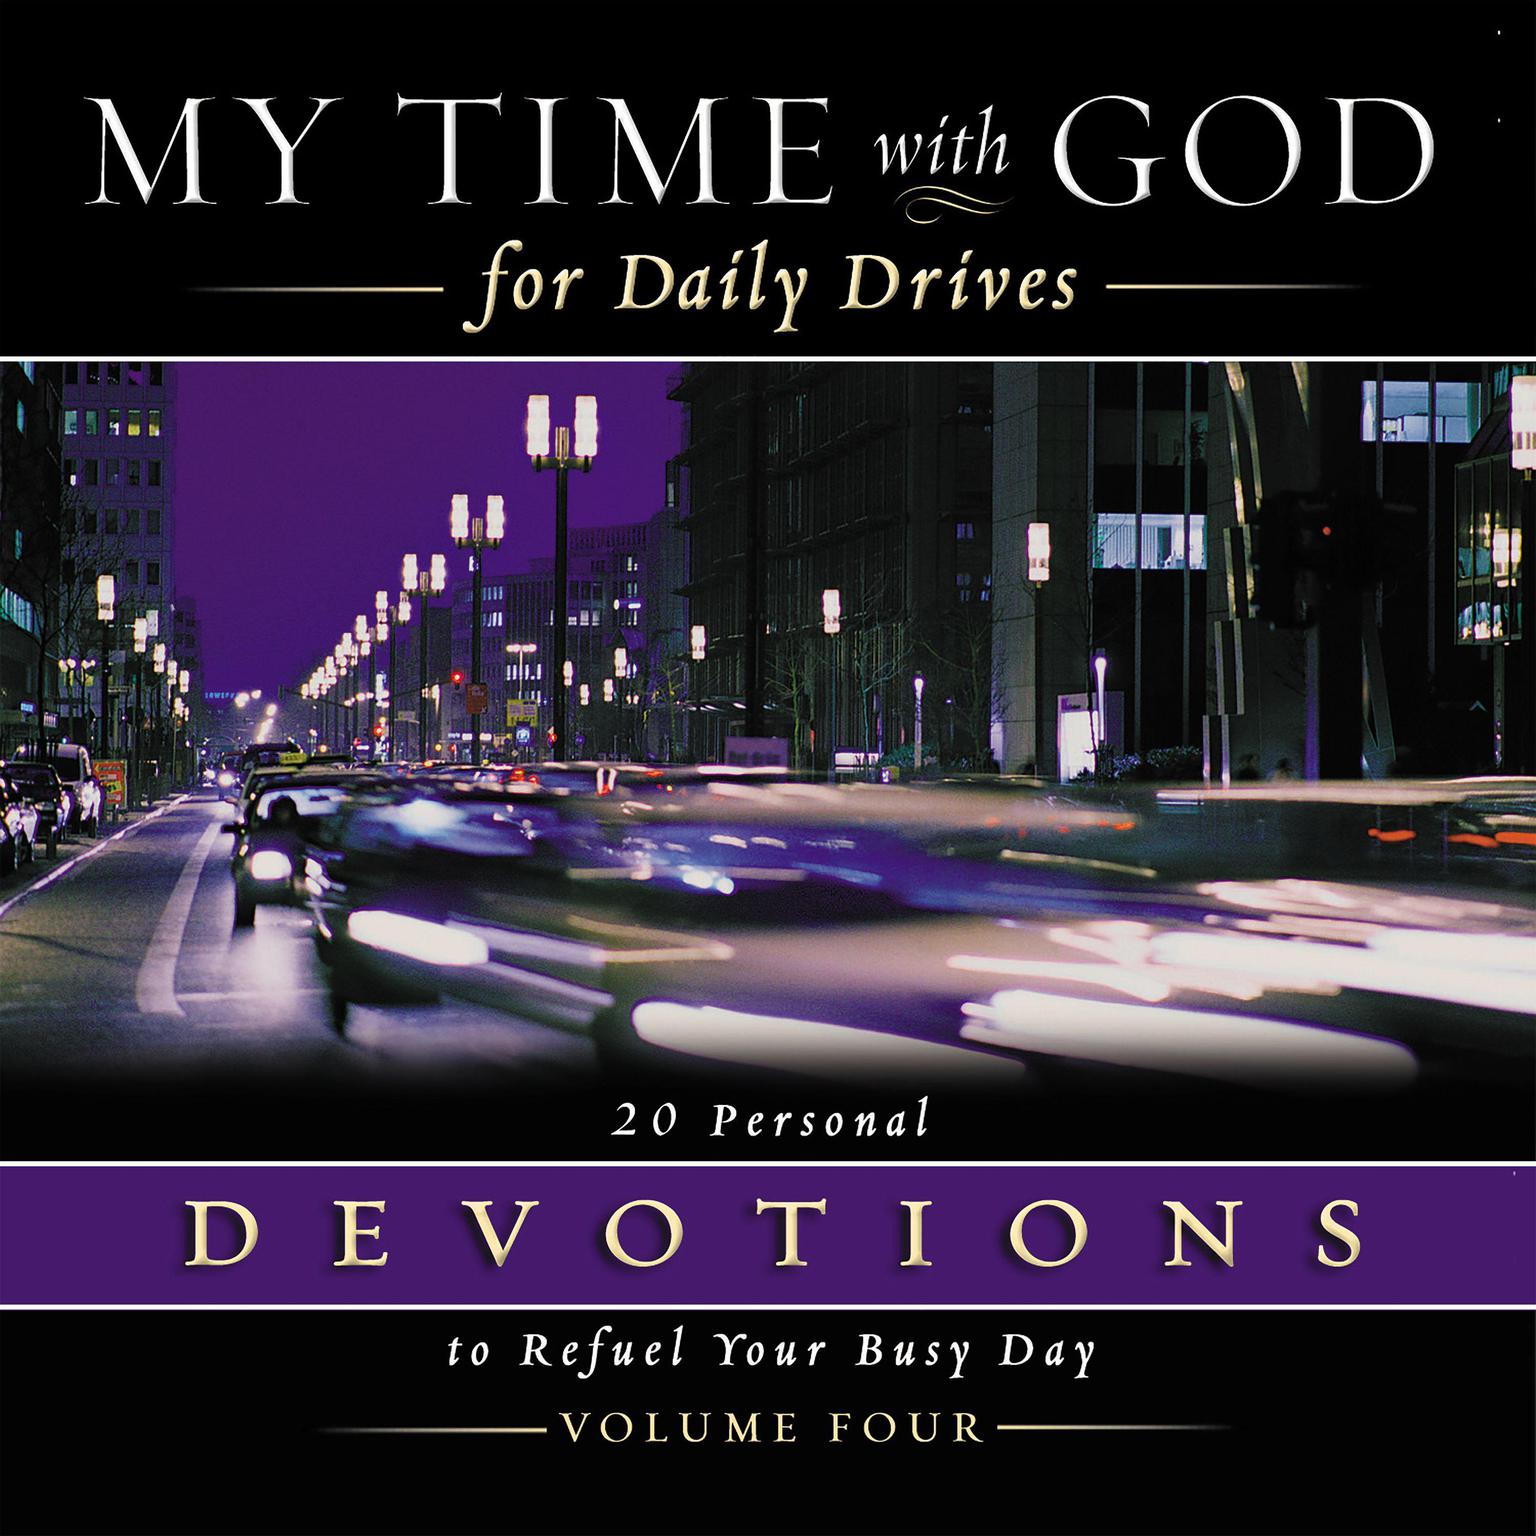 My Time with God for Daily Drives Audio Devotional: Vol. 4: 20 Personal Devotions to Refuel Your Busy Day Audiobook, by Thomas Nelson